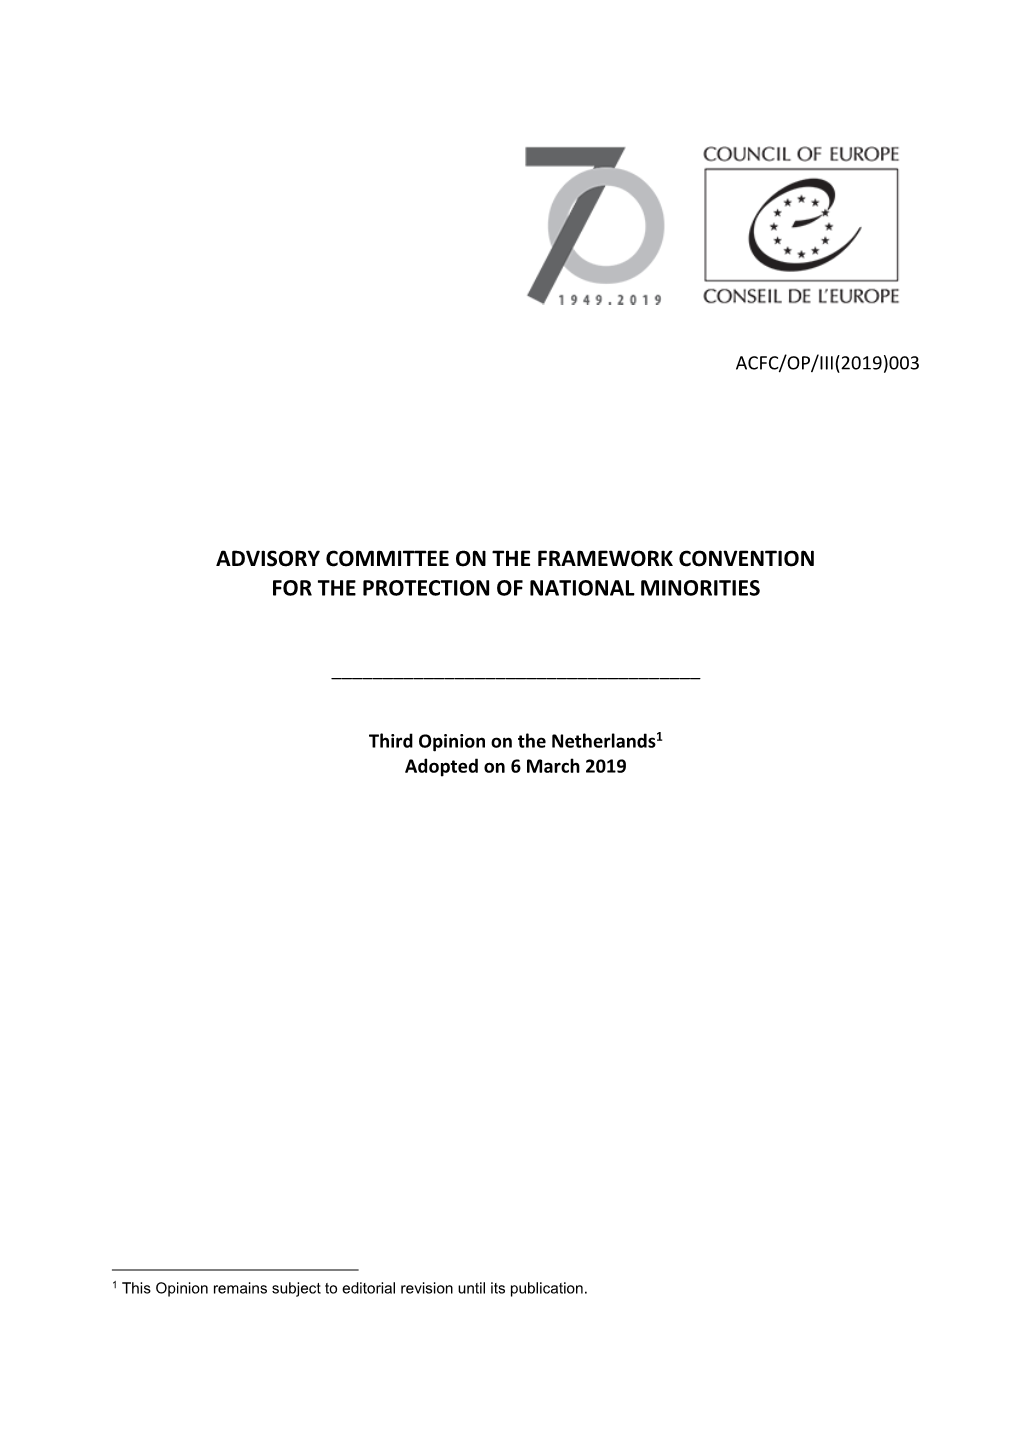 Advisory Committee on the Framework Convention for the Protection of National Minorities